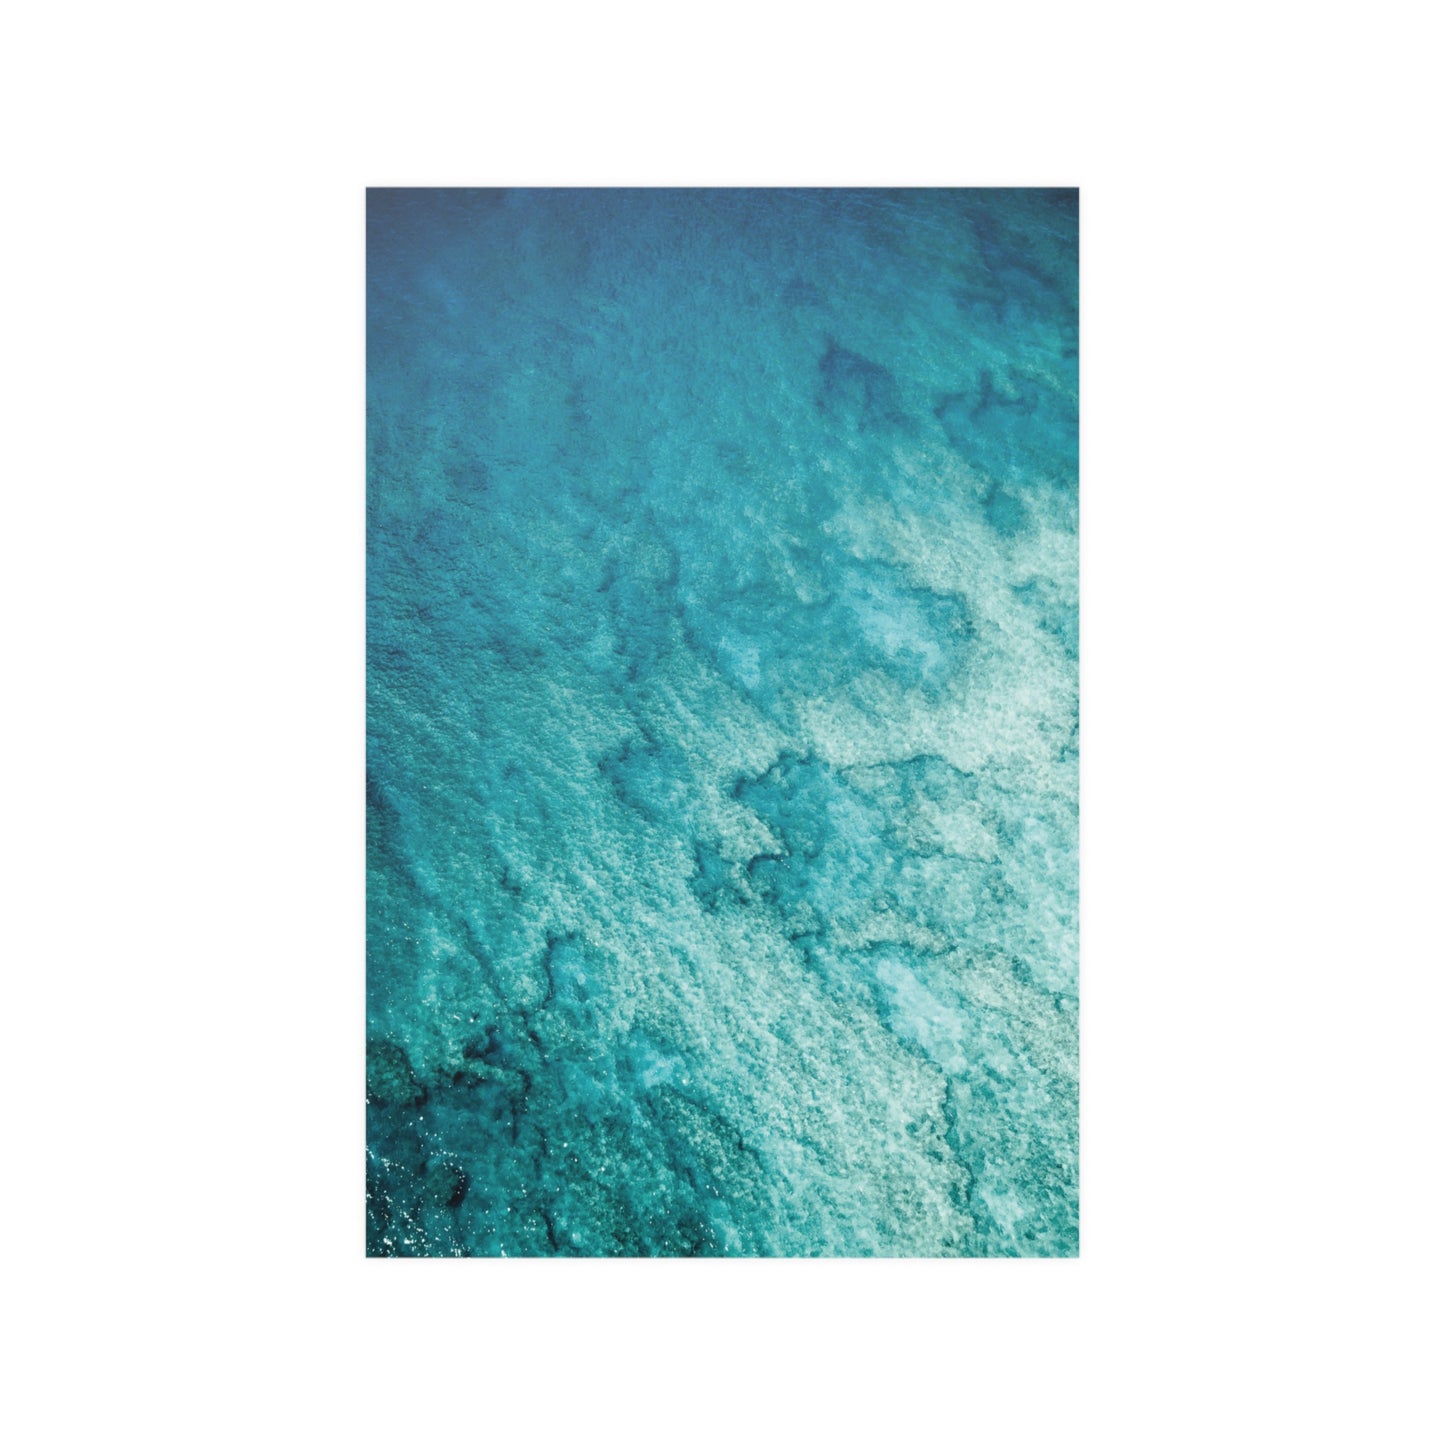 Textured Ocean and Coral Poster Print